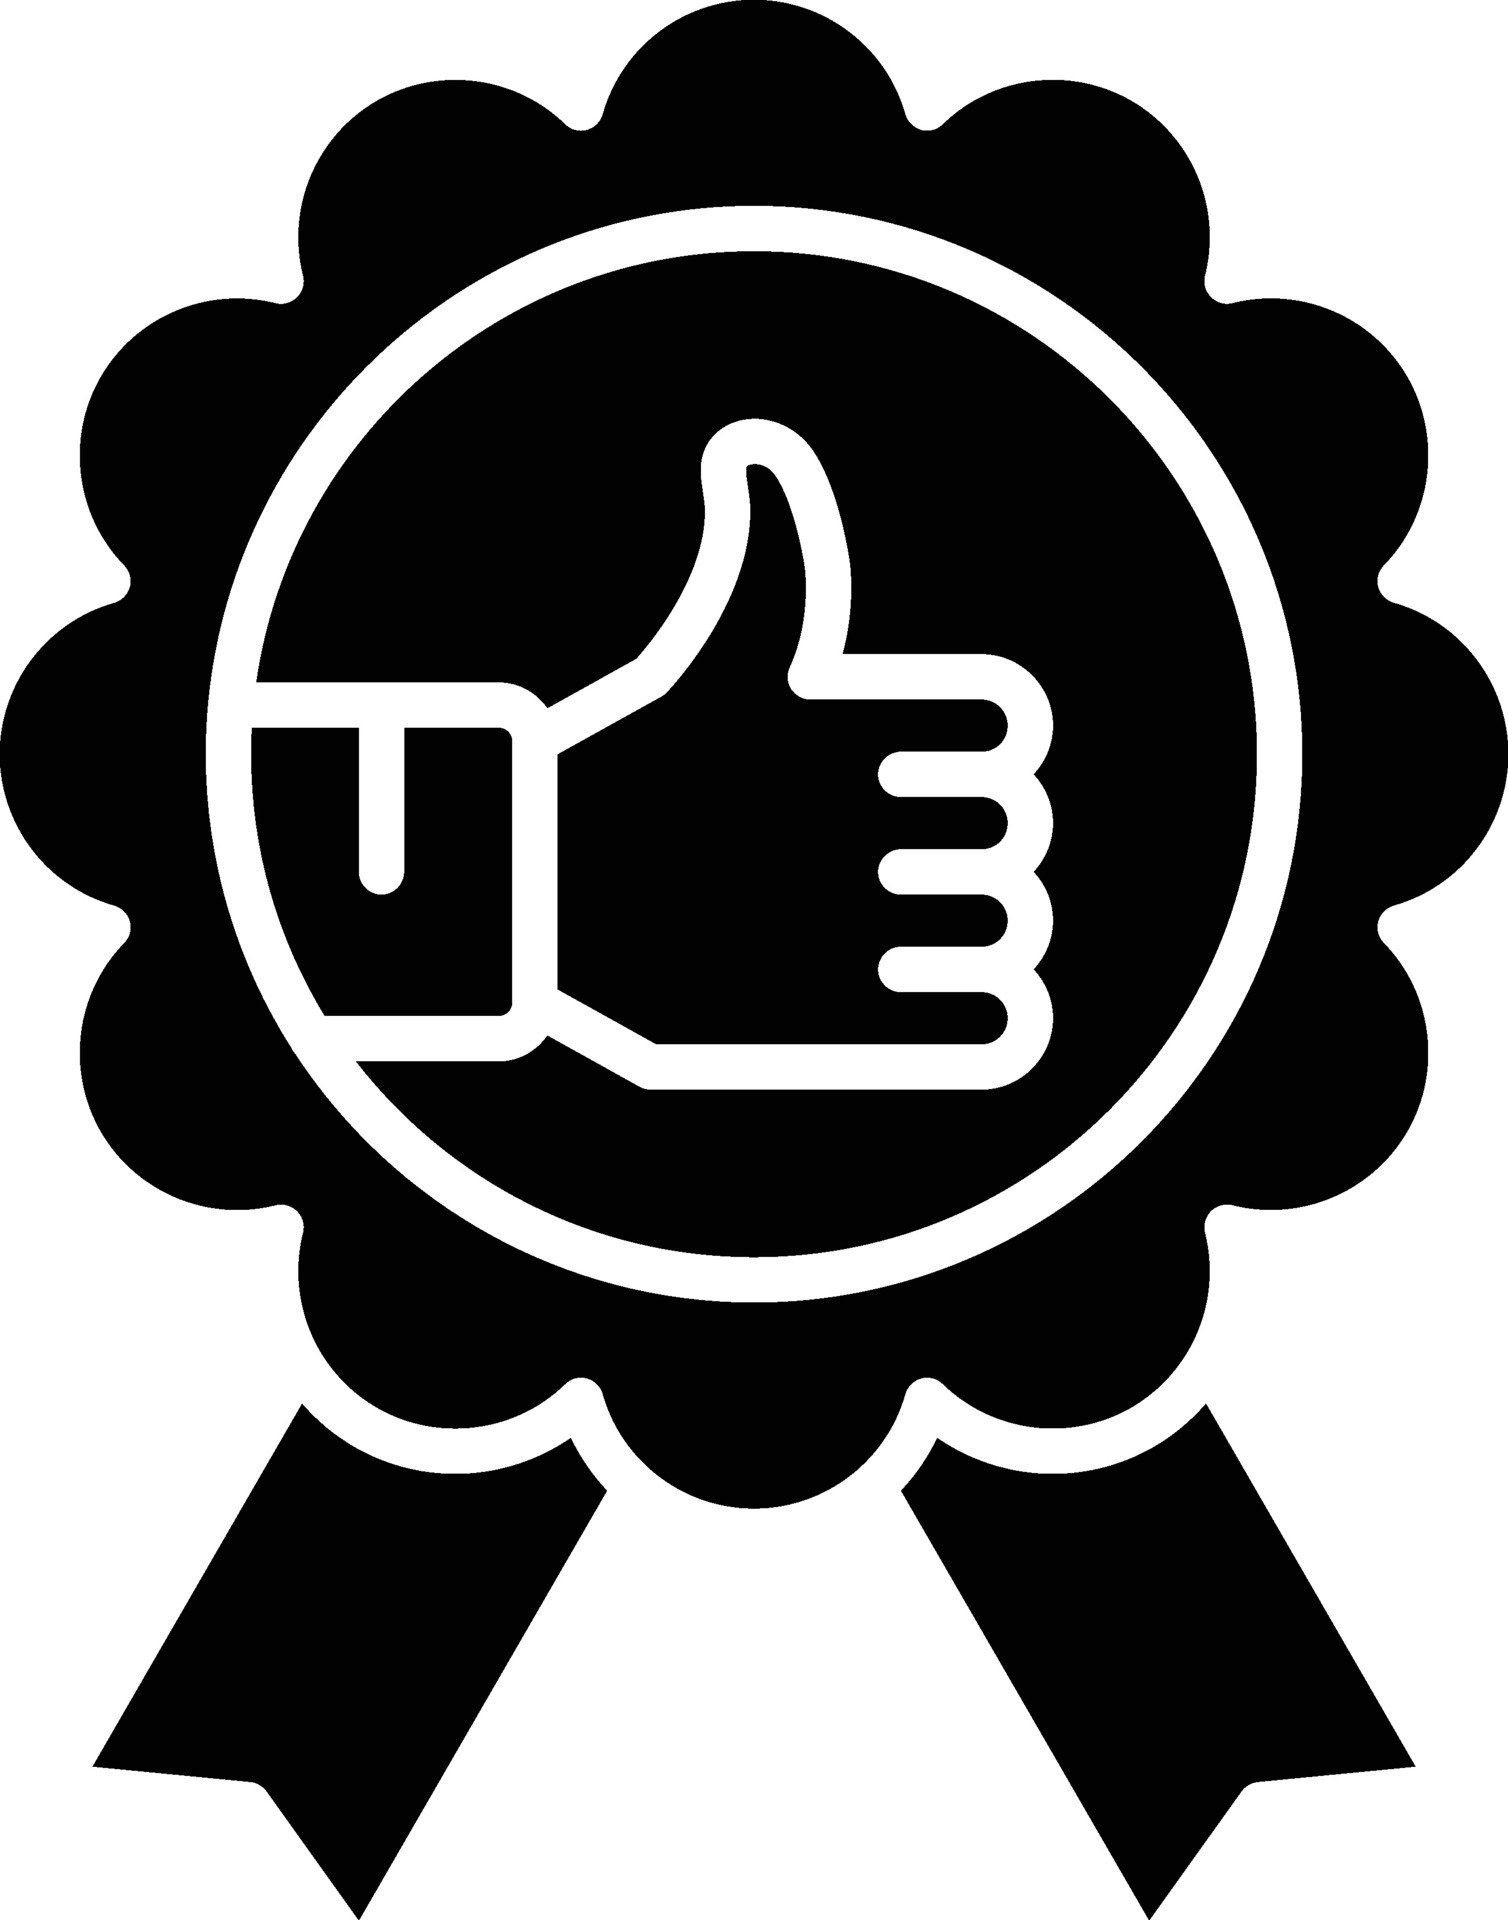 https://static.vecteezy.com/system/resources/previews/030/338/558/original/top-rated-icon-vector.jpg